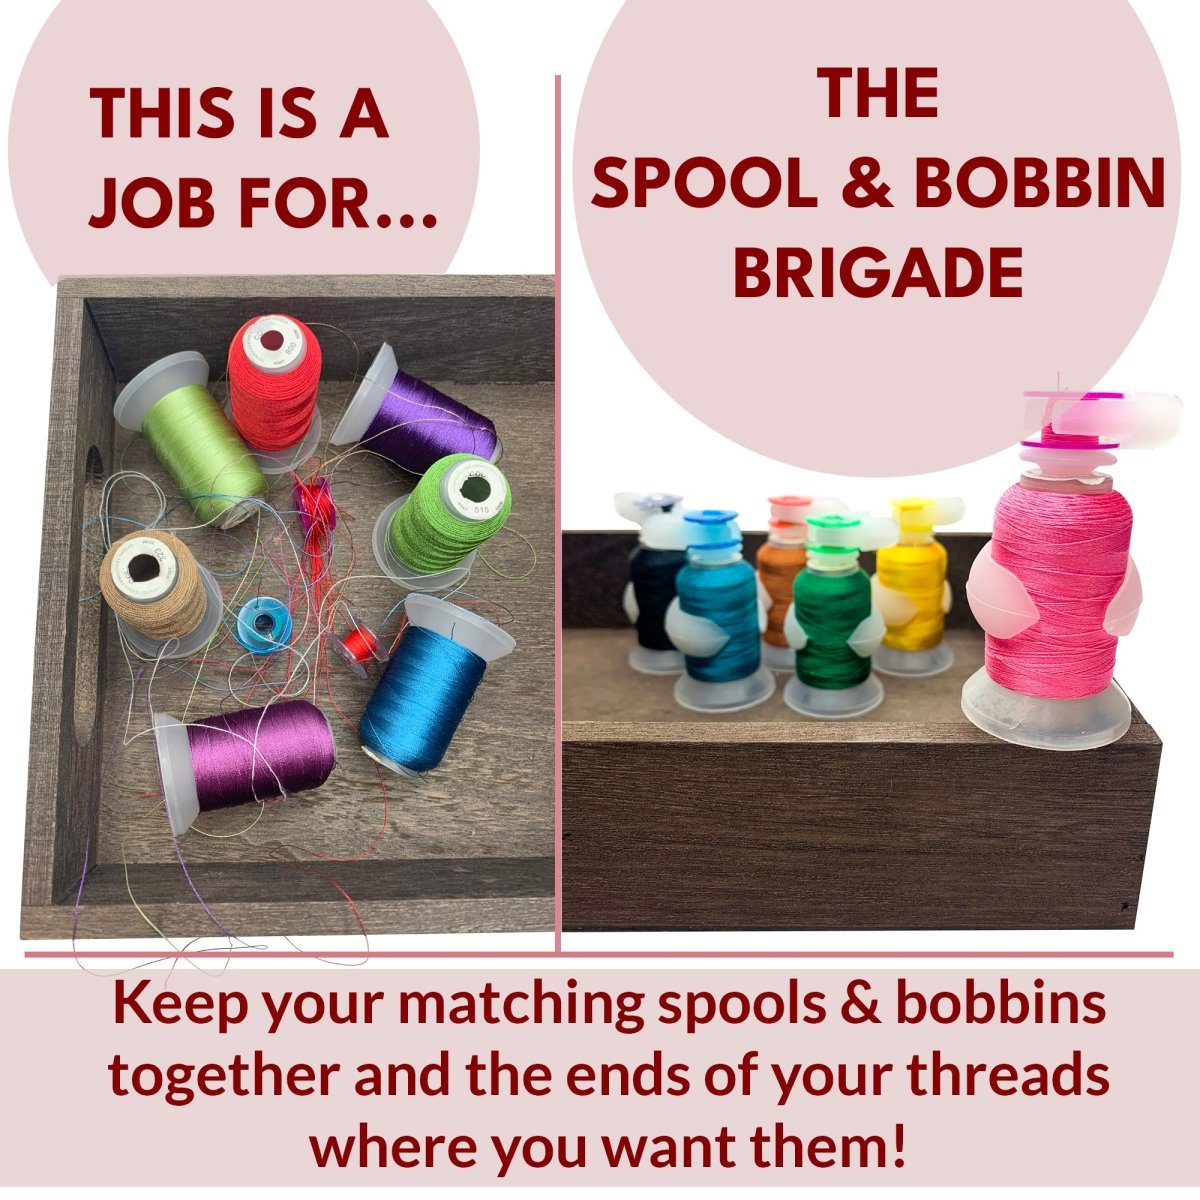 with these tools you won't get tangled threads from spools and bobbins any more